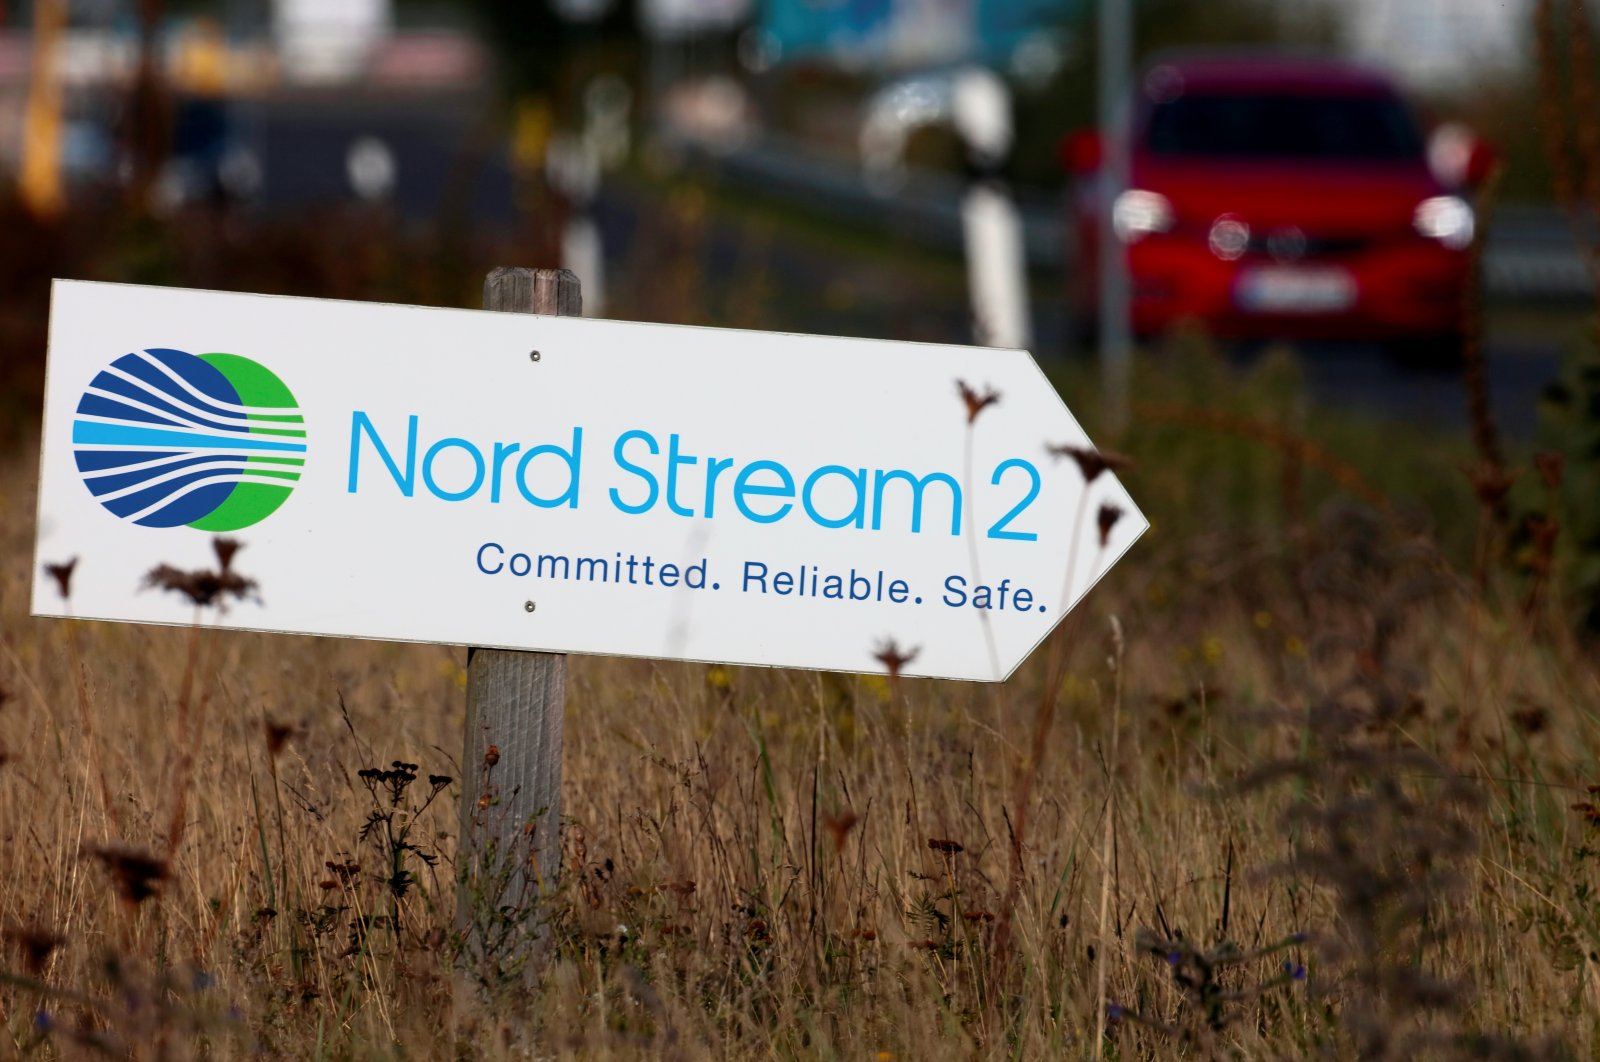 A road sign directs traffic towards the Nord Stream 2 gas line landfall facility entrance in Lubmin, Germany, Sept. 10, 2020. (Reuters File Photo)